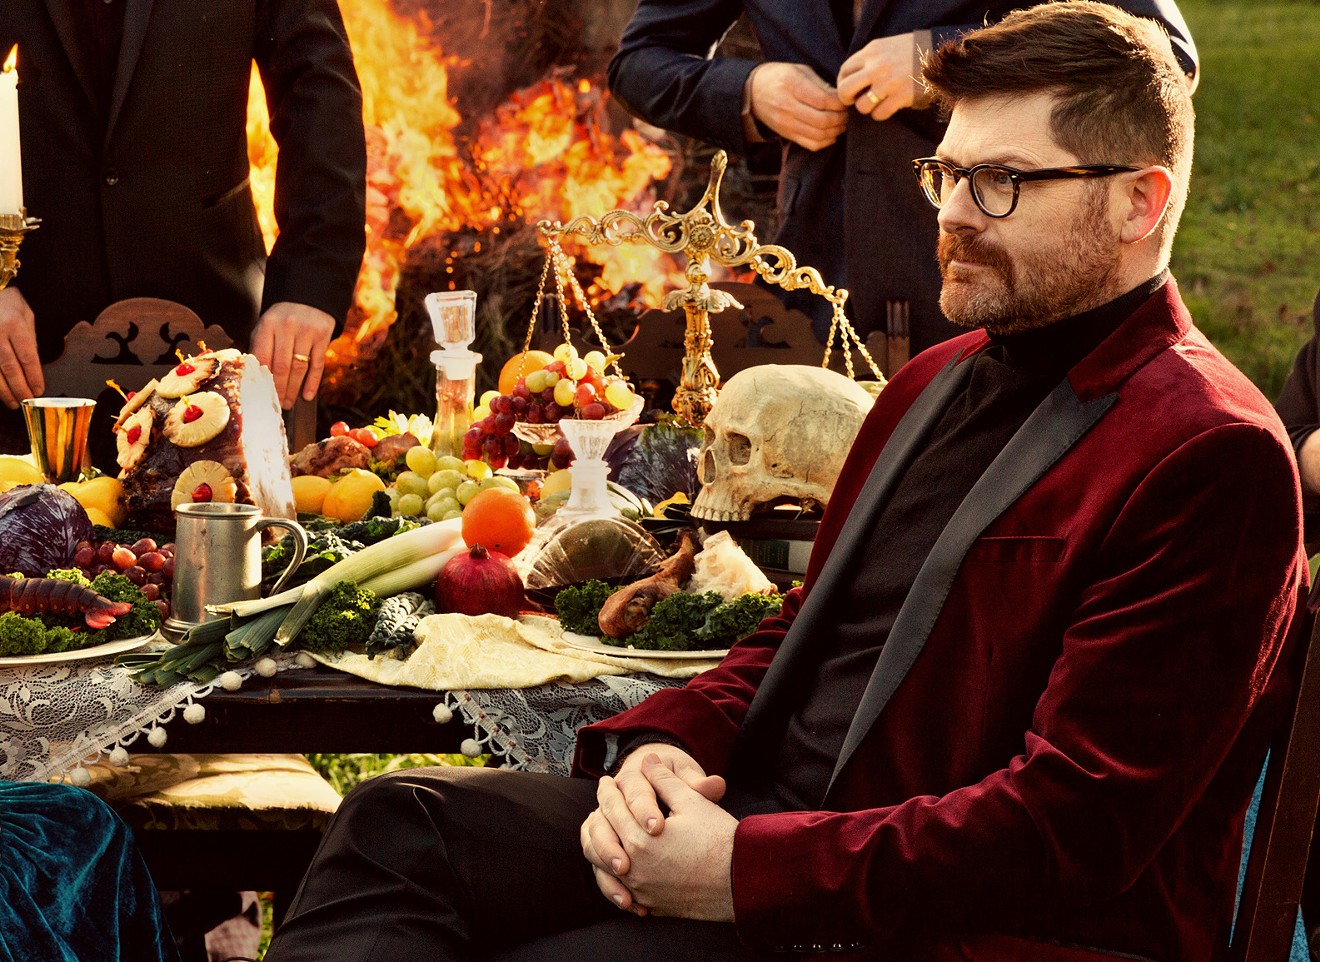 Colin Meloy of the Decemberists streams a solo show on Thursday, December 10.